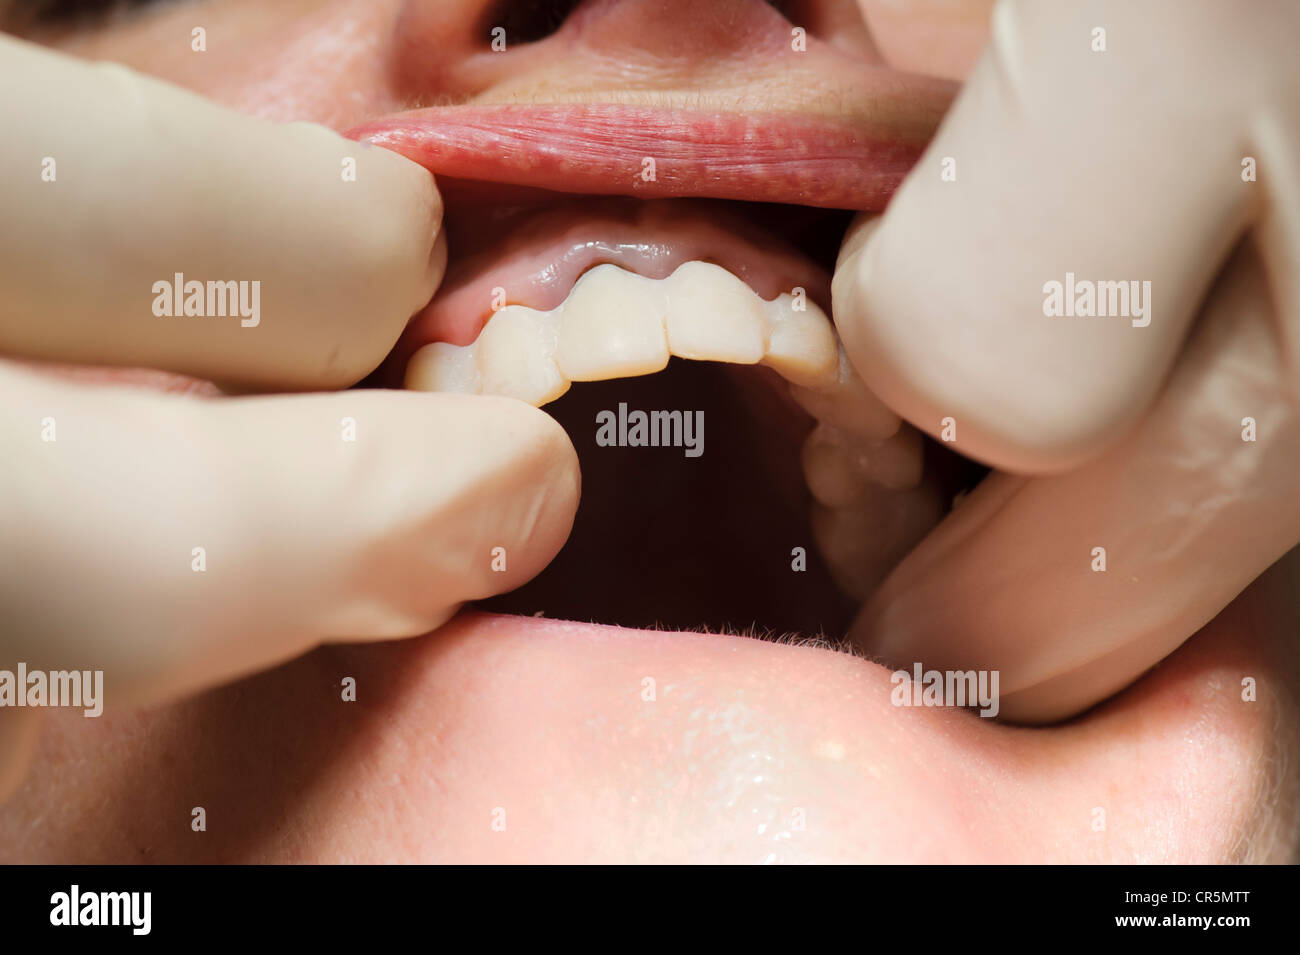 Adjusting the provisional crowns during dental treatment Stock Photo